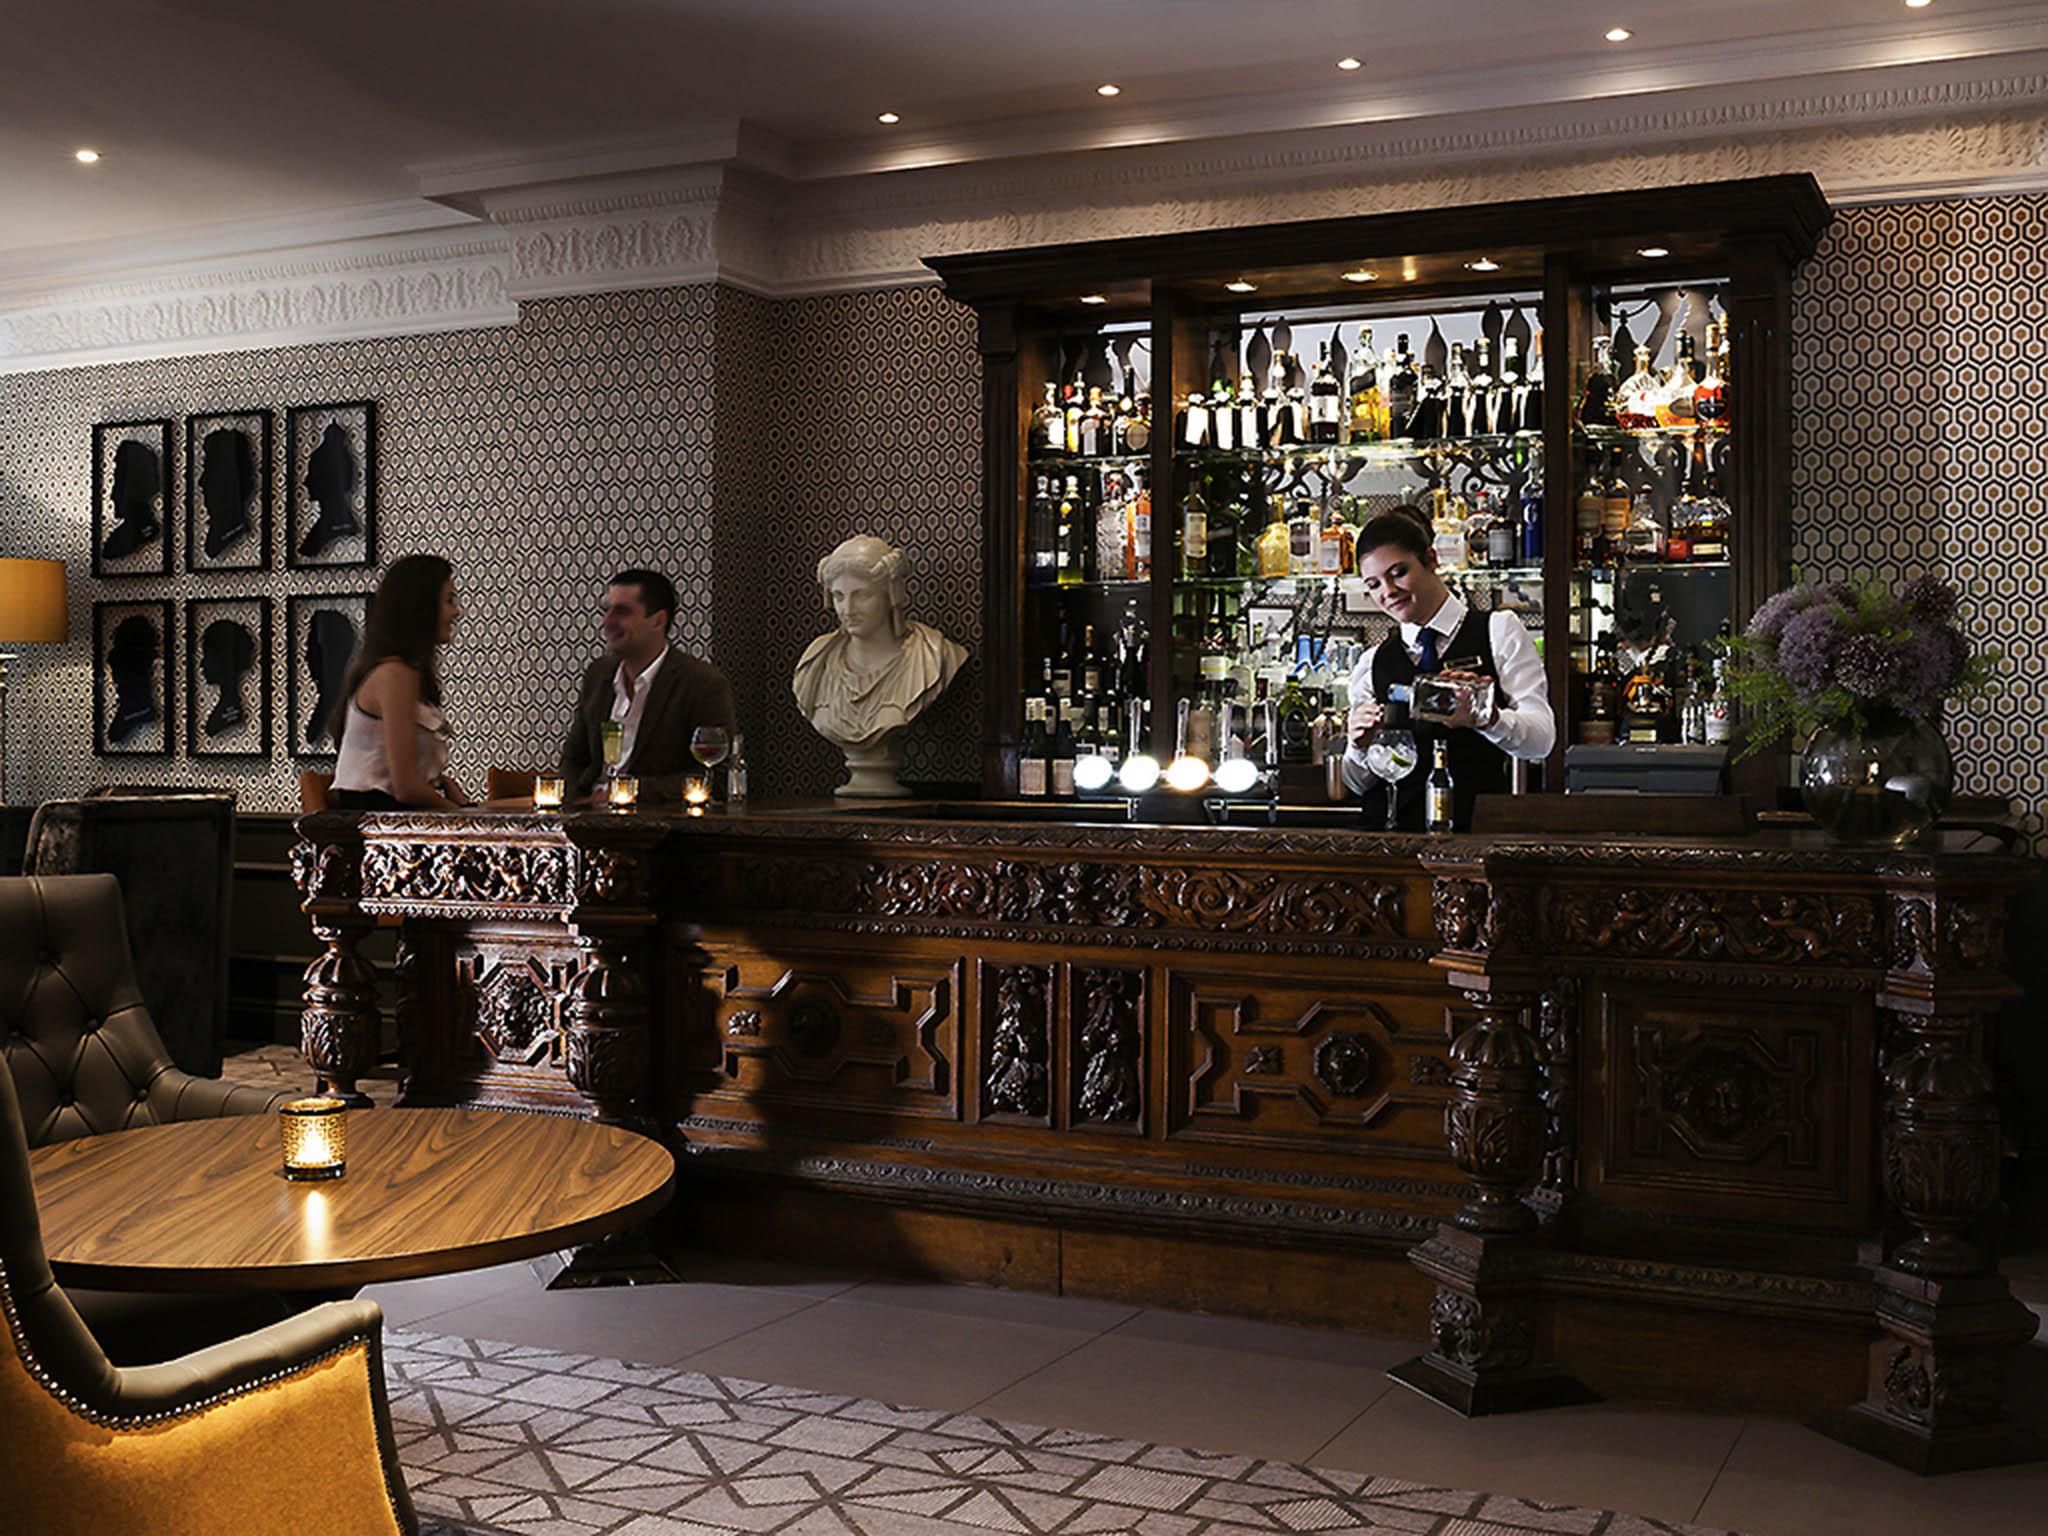 The Sherbourne Pump is the hotel's bar